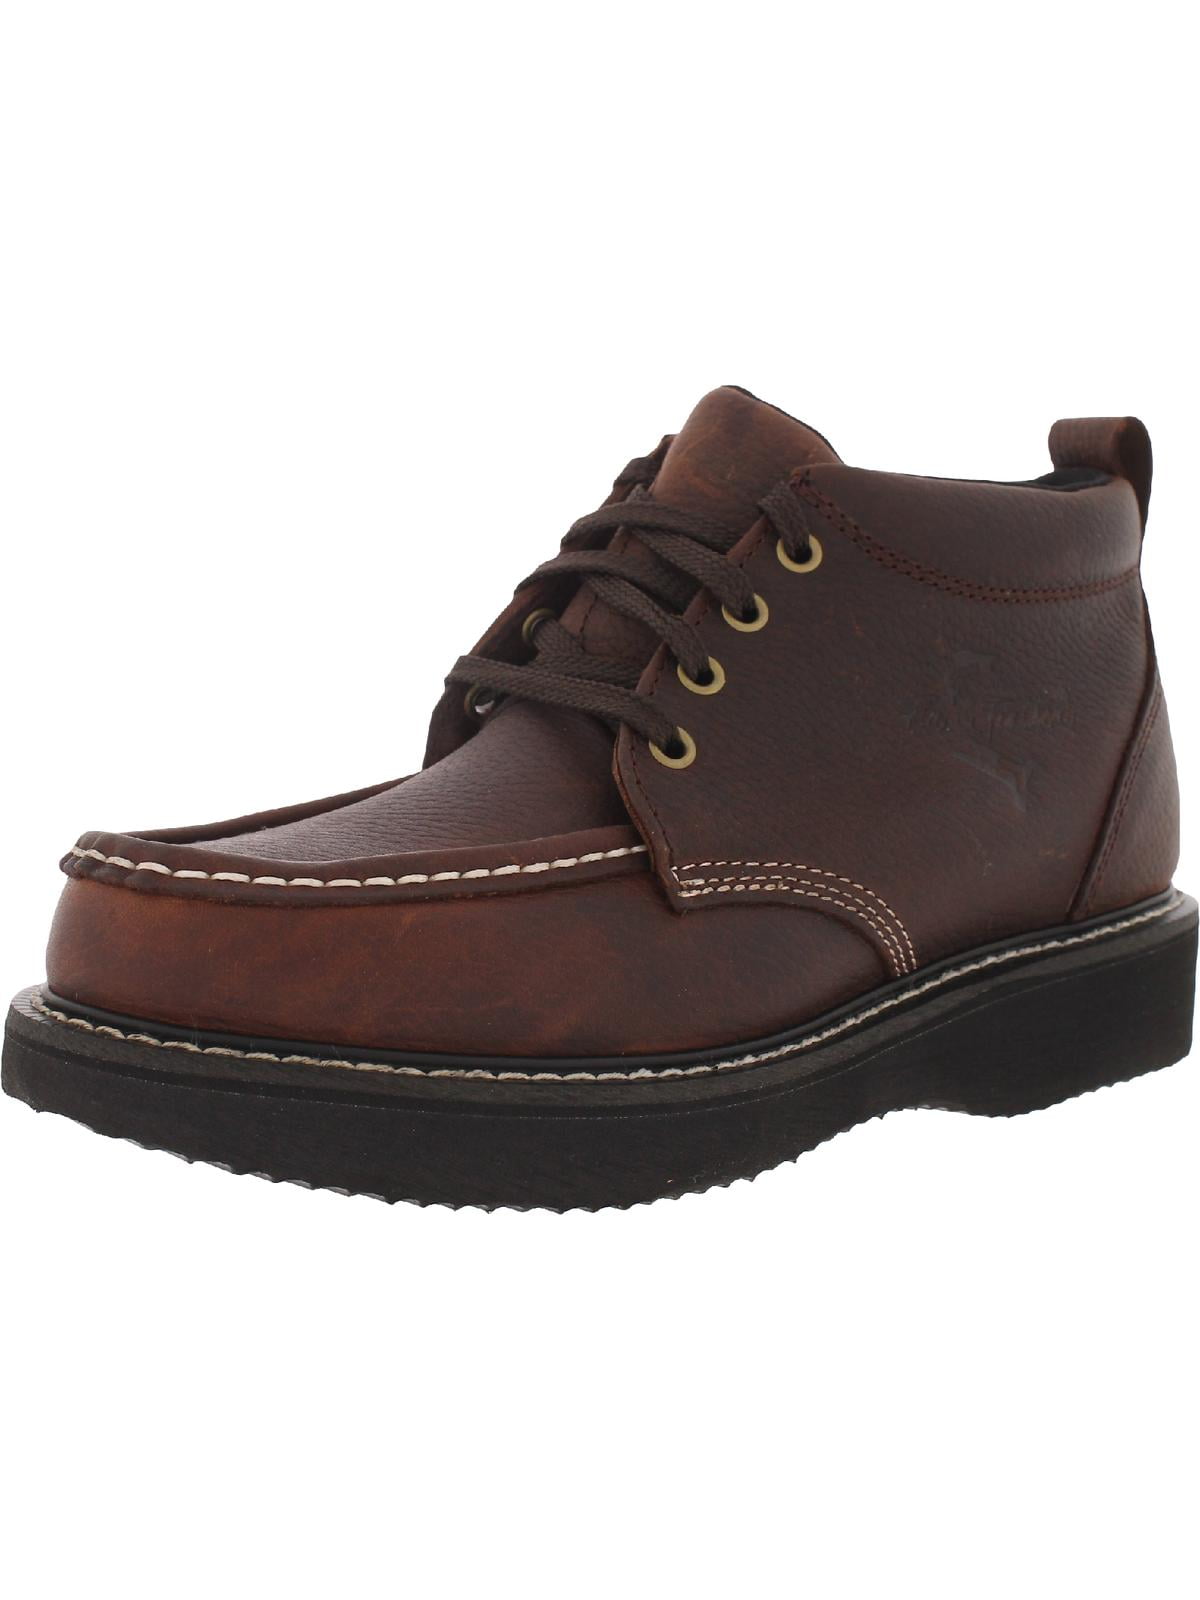 Fin & Feather Mens Chukka Leather Ankle Hiking Boots - Walmart.com